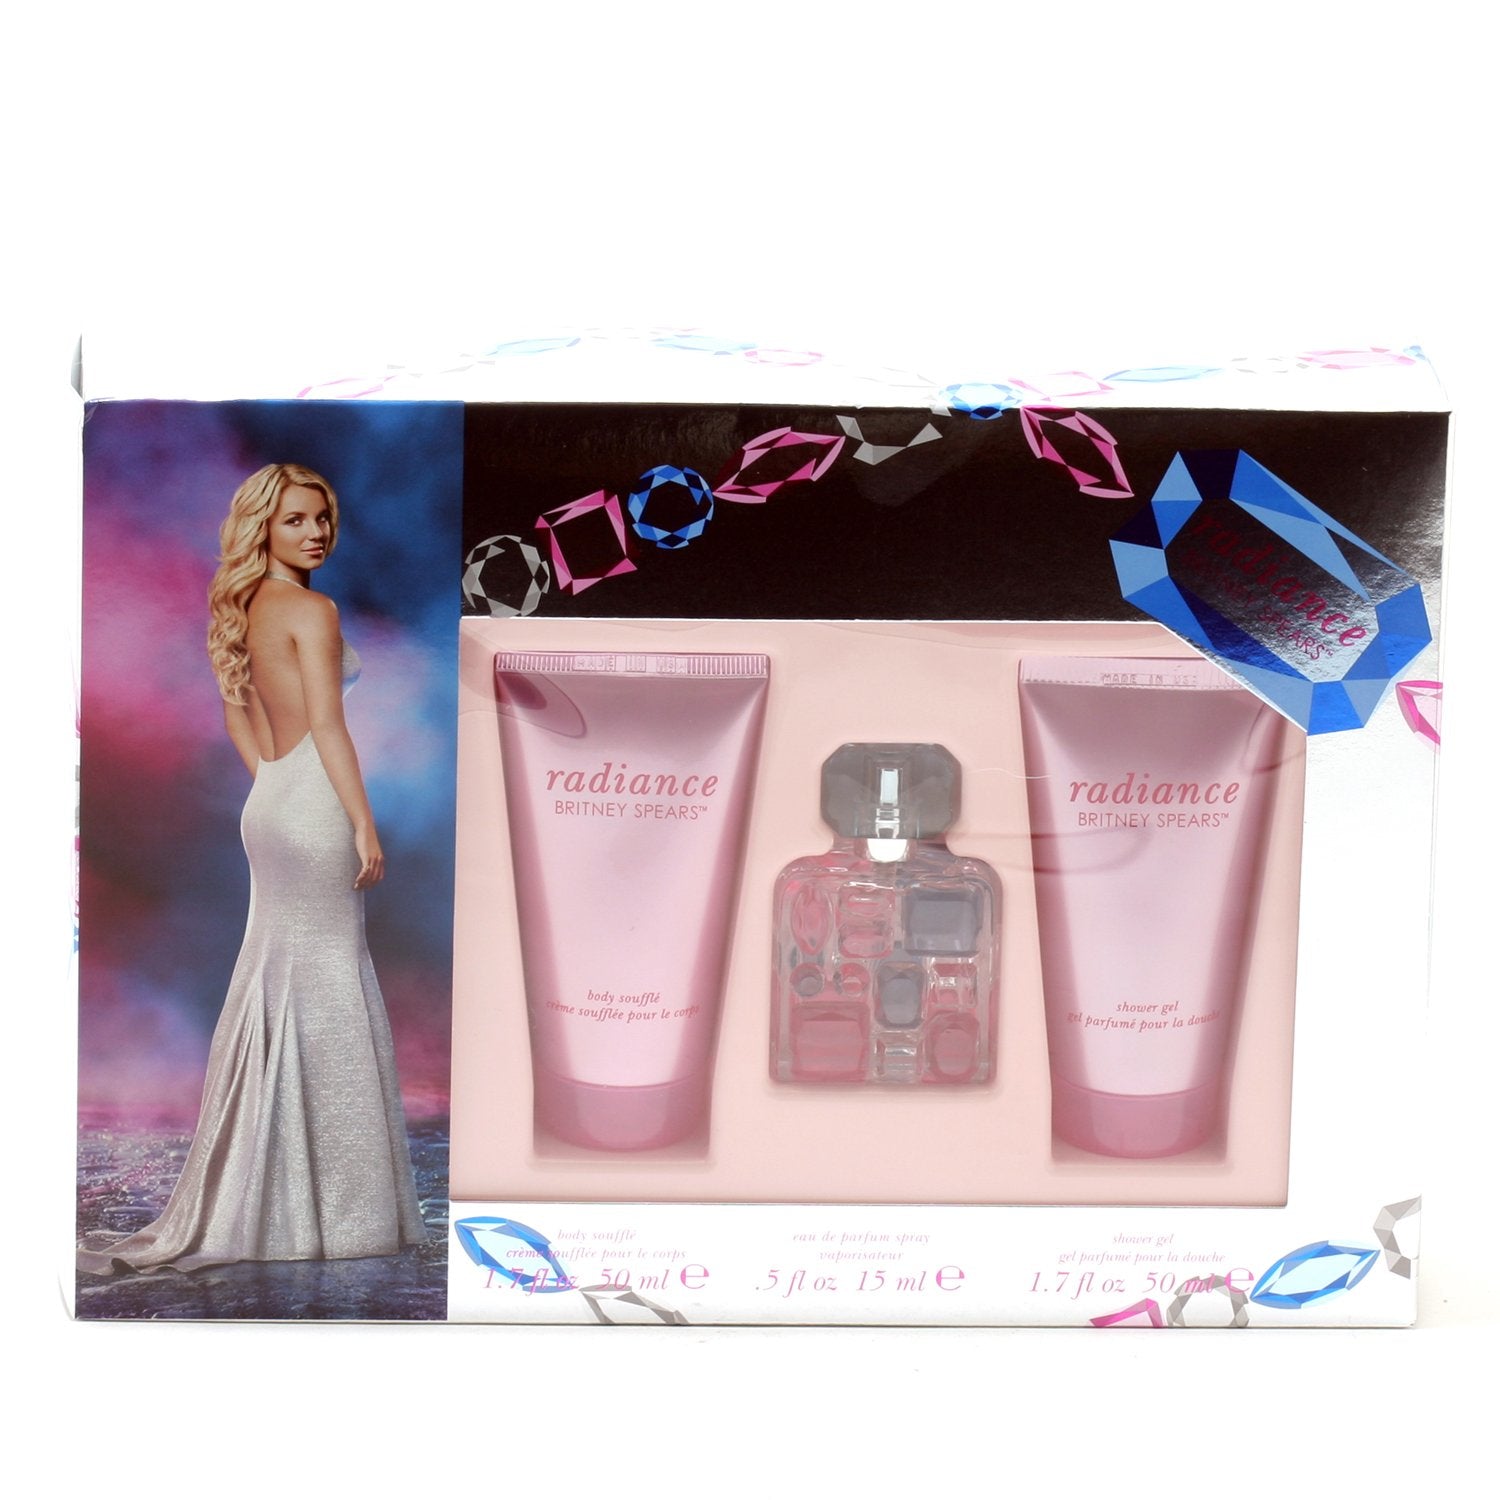 Perfume Sets - RADIANCE FOR WOMEN BY BRITNEY SPEARS - GIFT SET